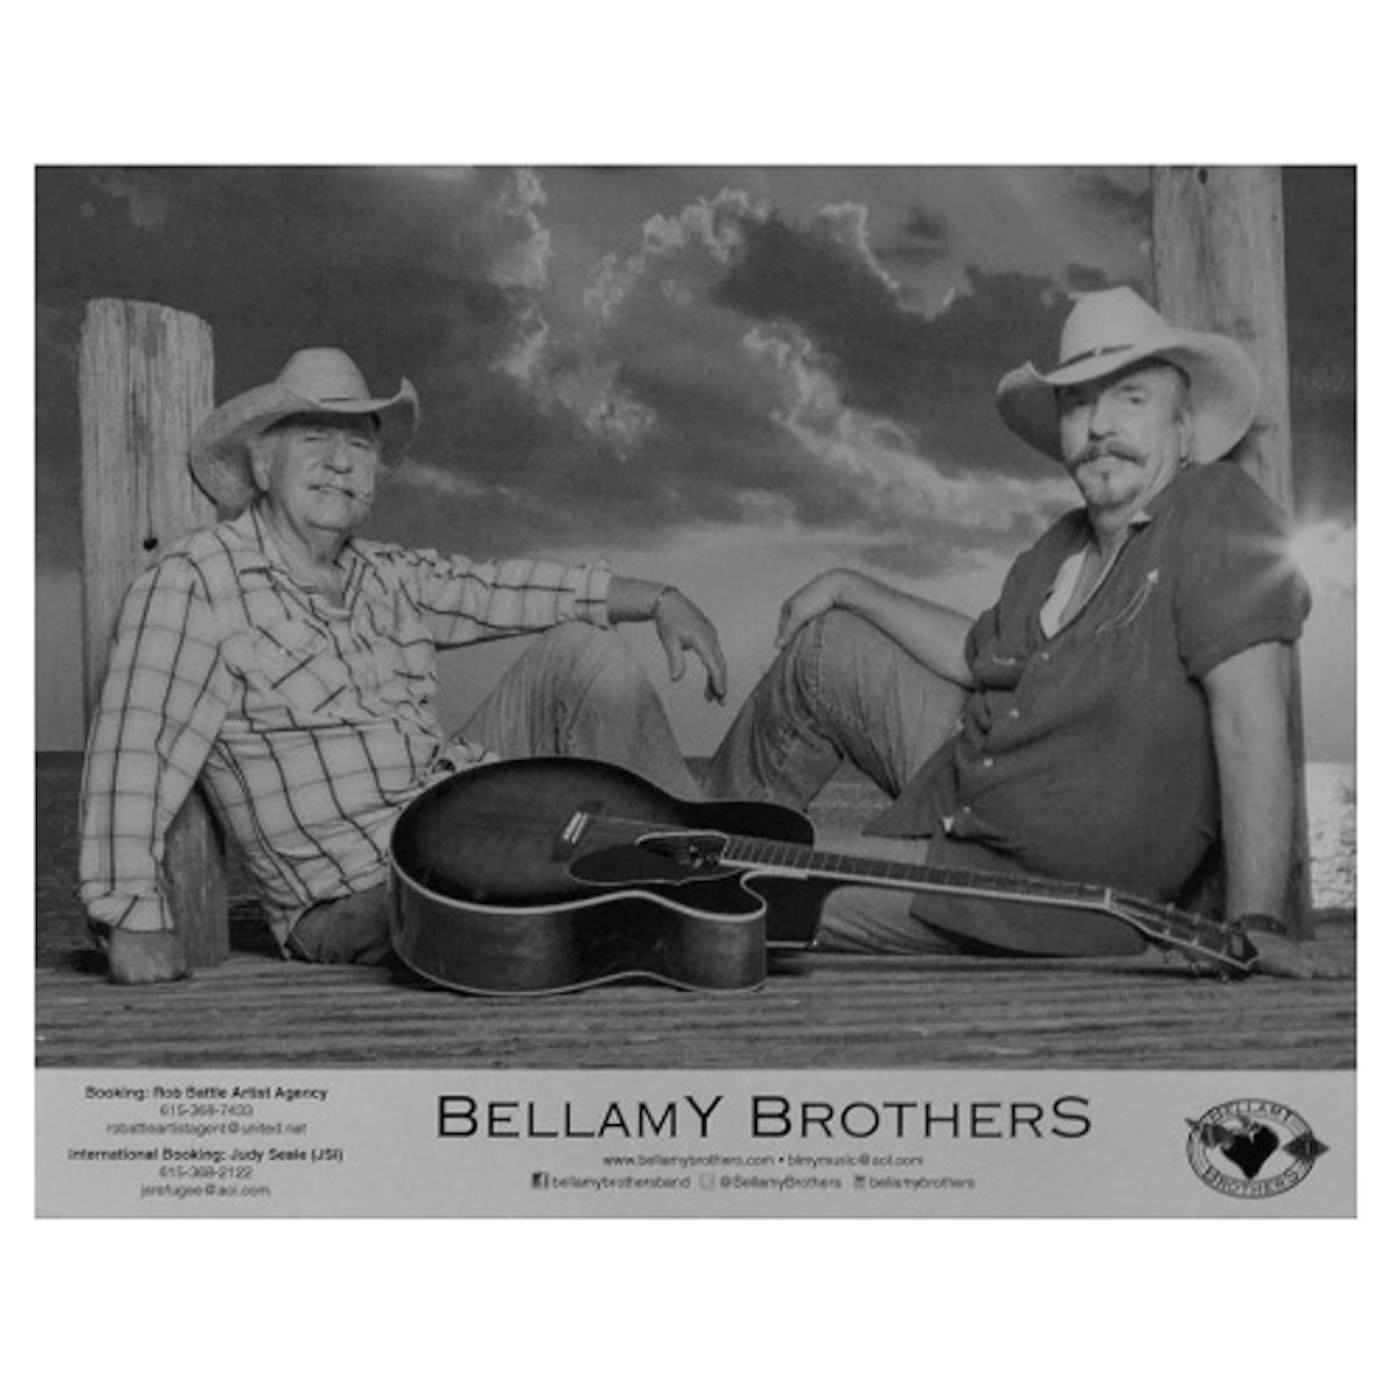 The Bellamy Brothers Bellamy Brother Black and White 8x10